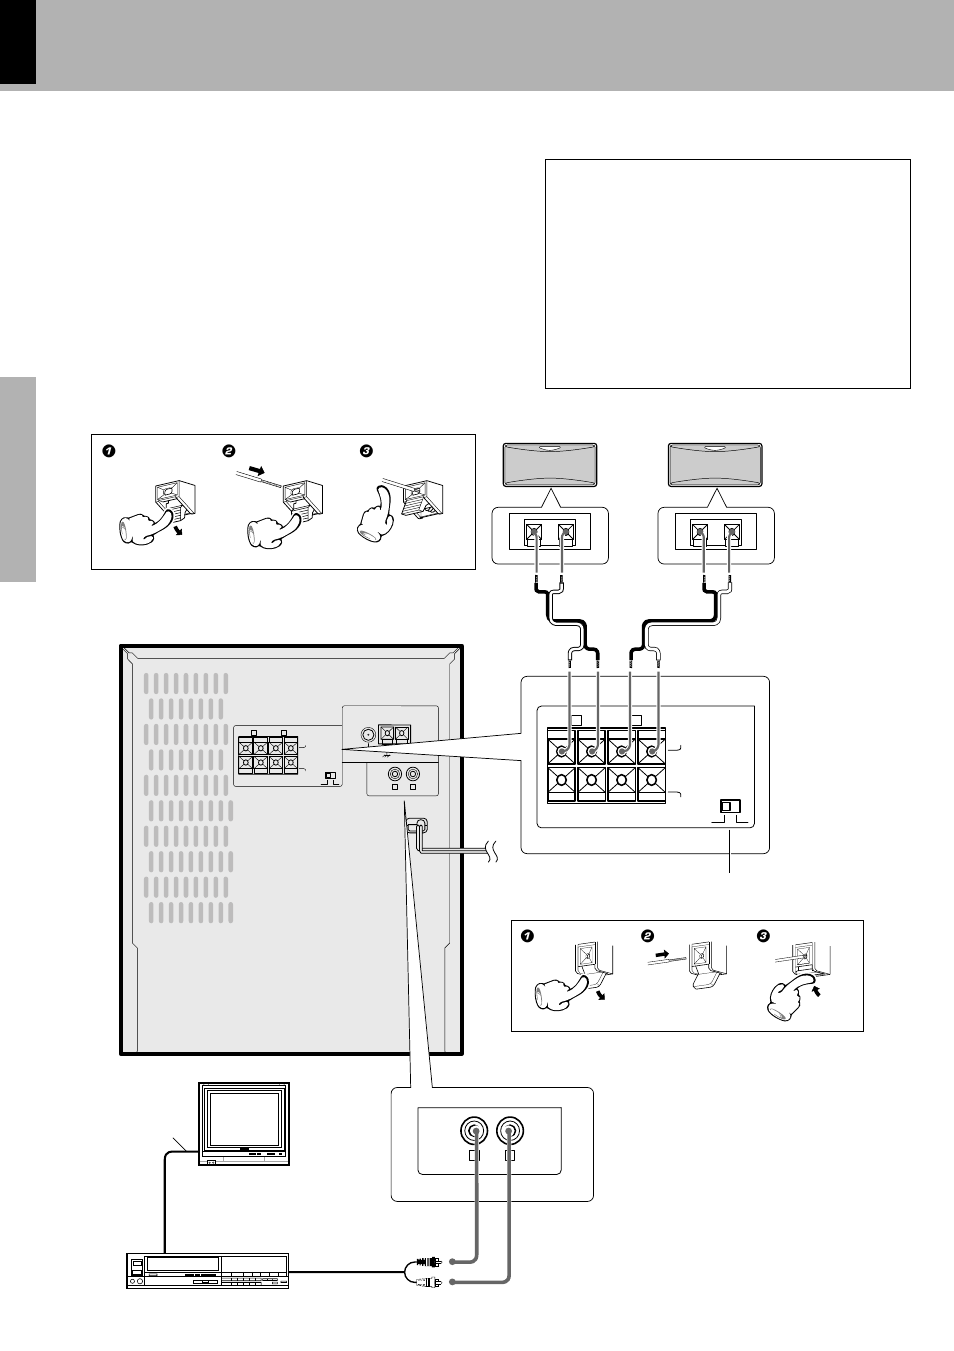 Connection of options, Optional parts), Speaker unit main unit | Kenwood XD- 500 User Manual | Page 8 / 60